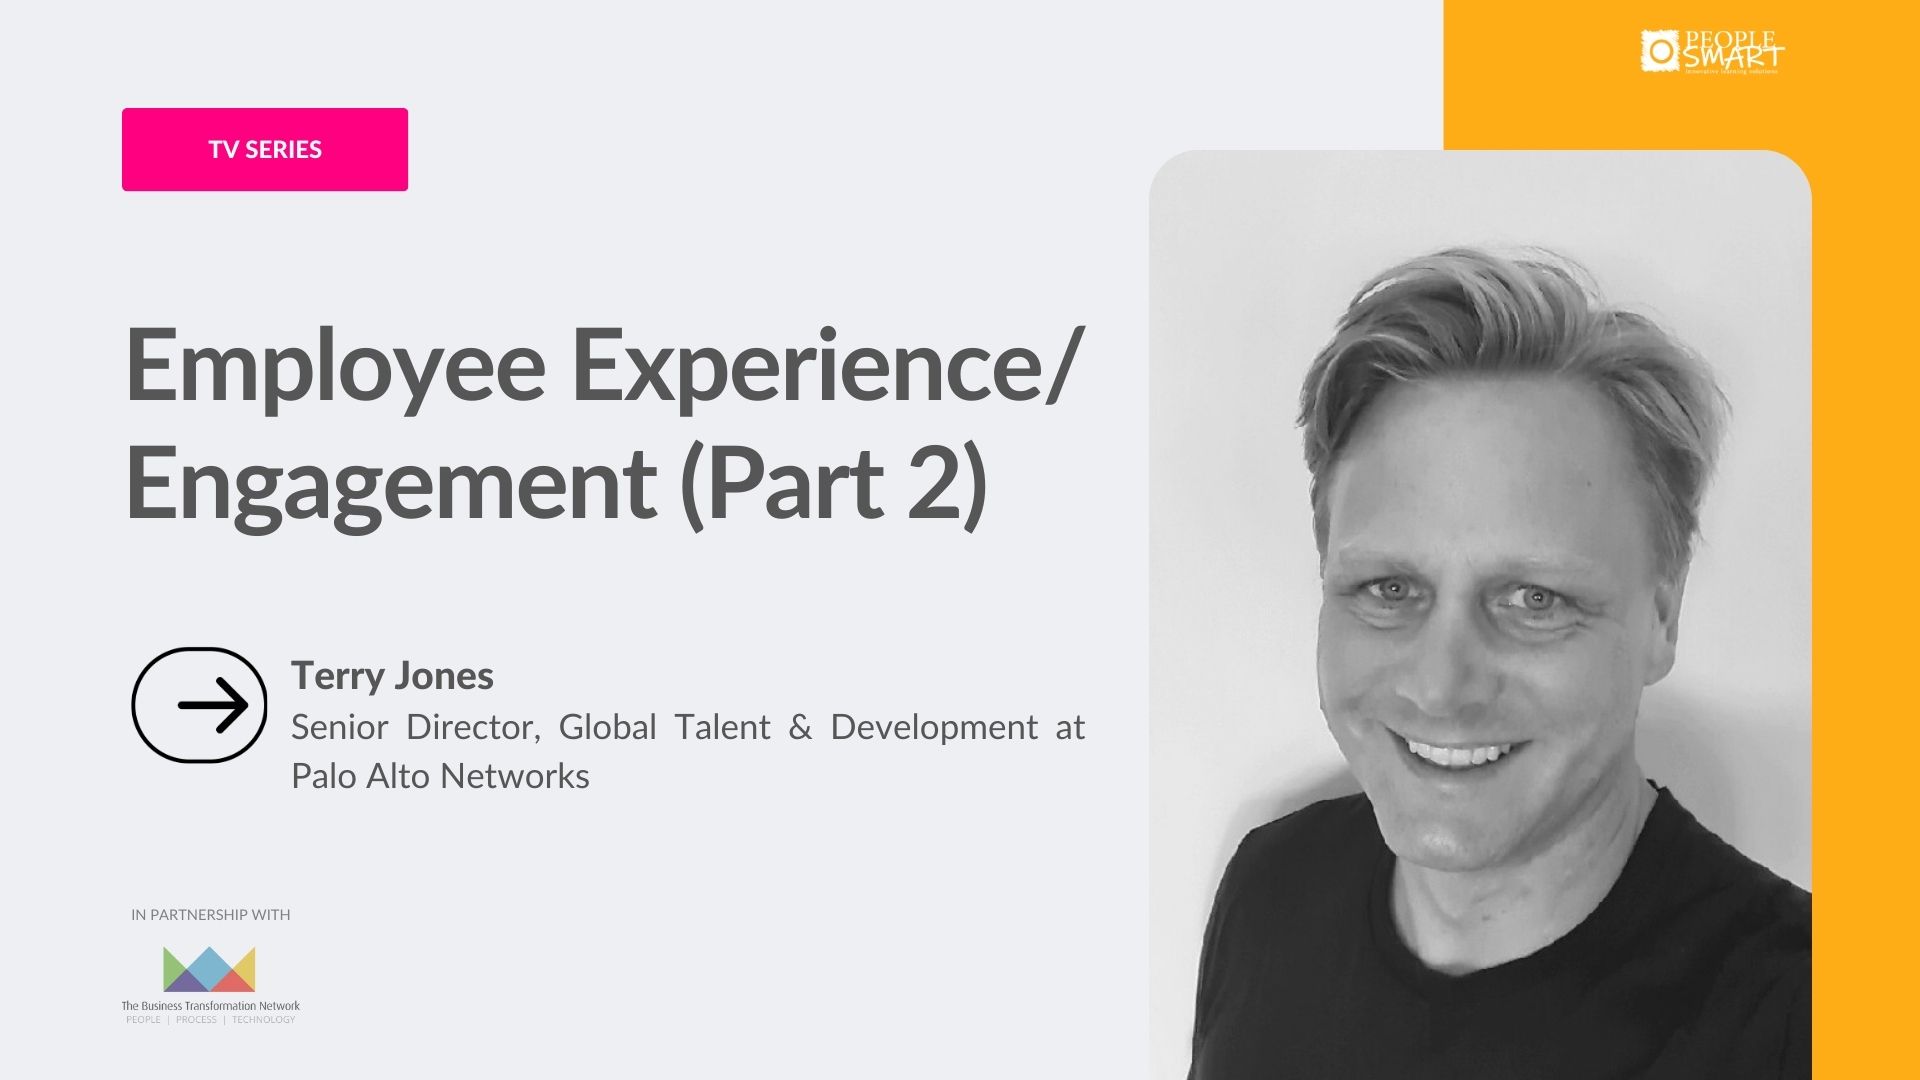 Employee Experience/Engagement with Terry Jones – Part 2